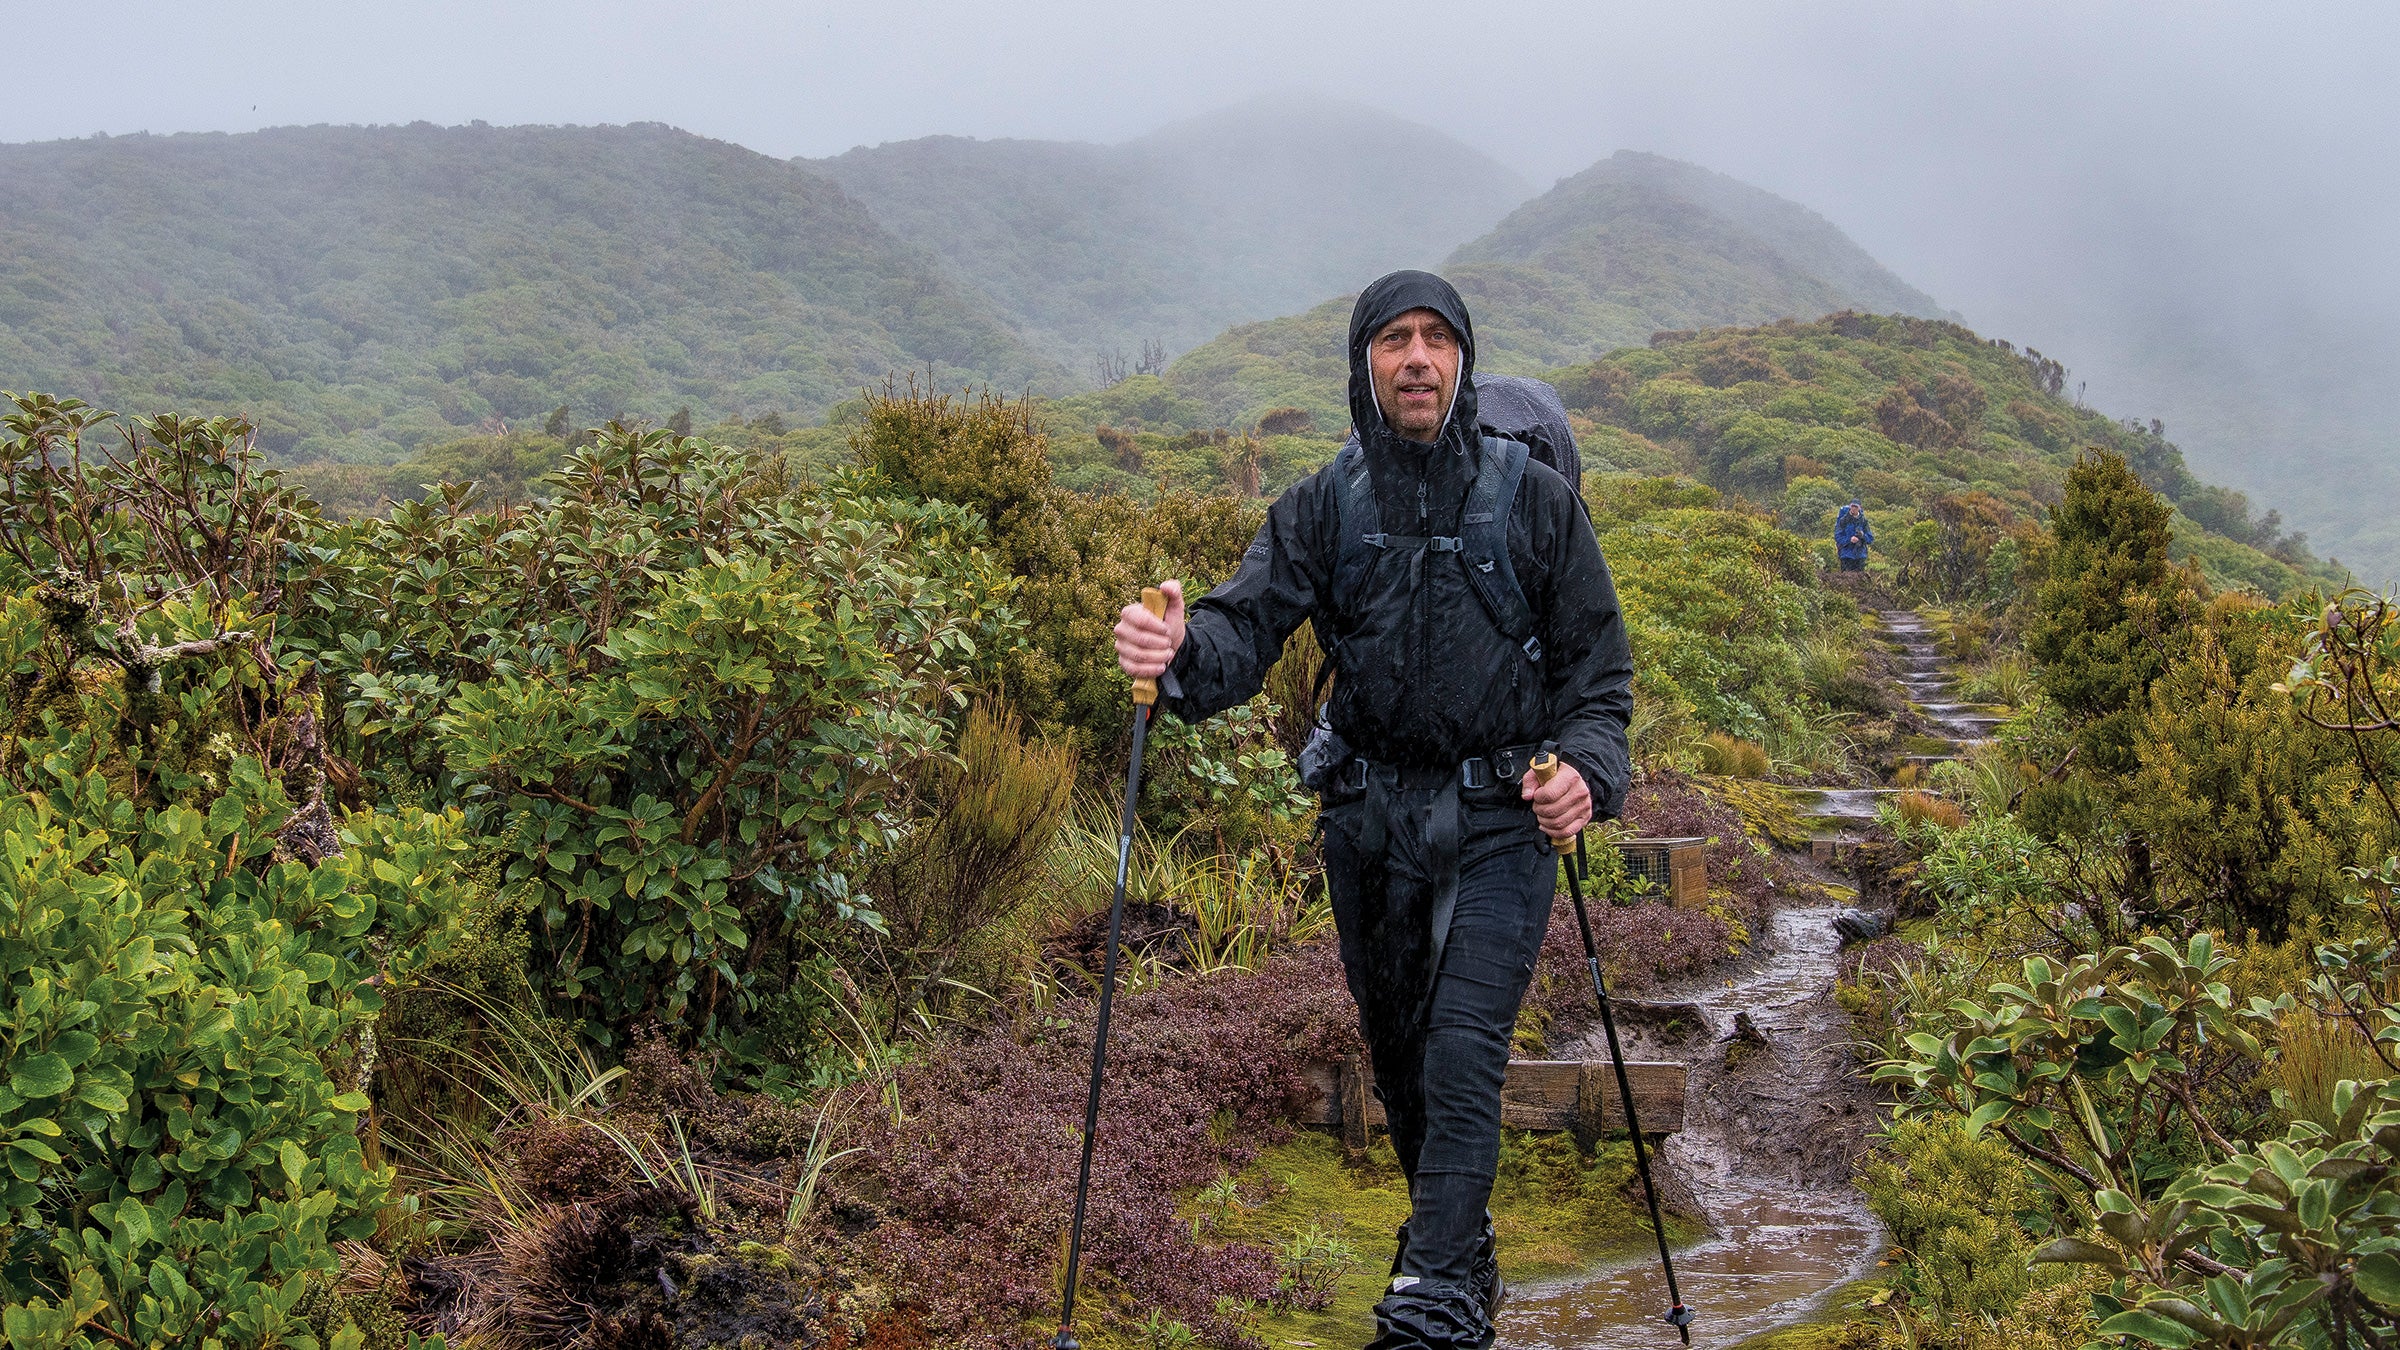 How to Level Up Your Rain Game for Wet Hikes - Backpacker